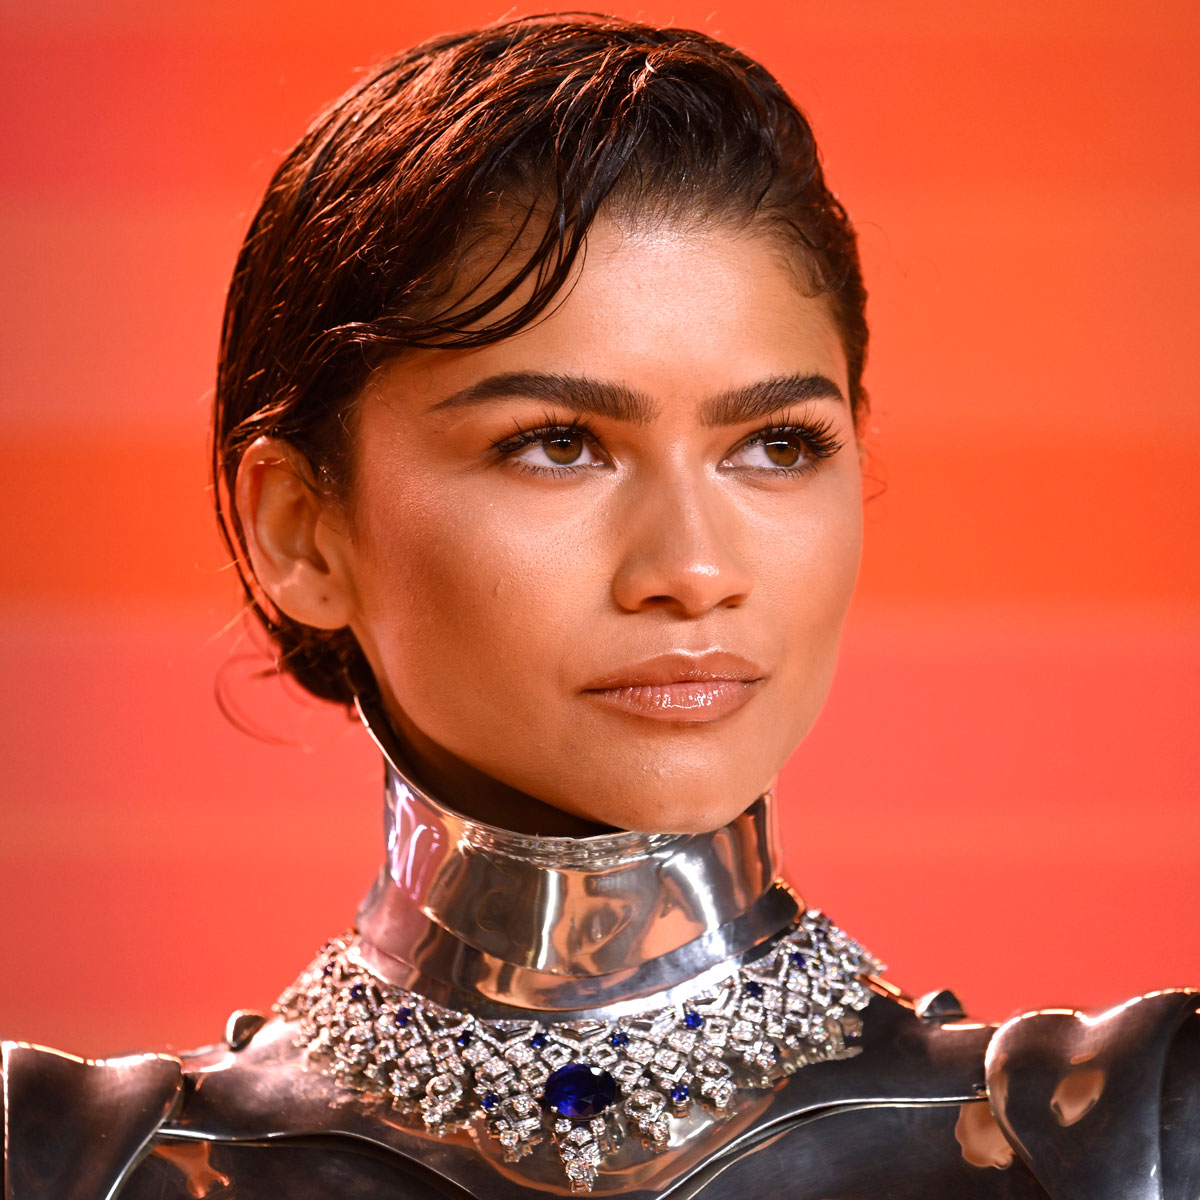 Zendaya Just Wore a Full-On Robot Look on the Red Carpet—Complete With Butt Cutouts